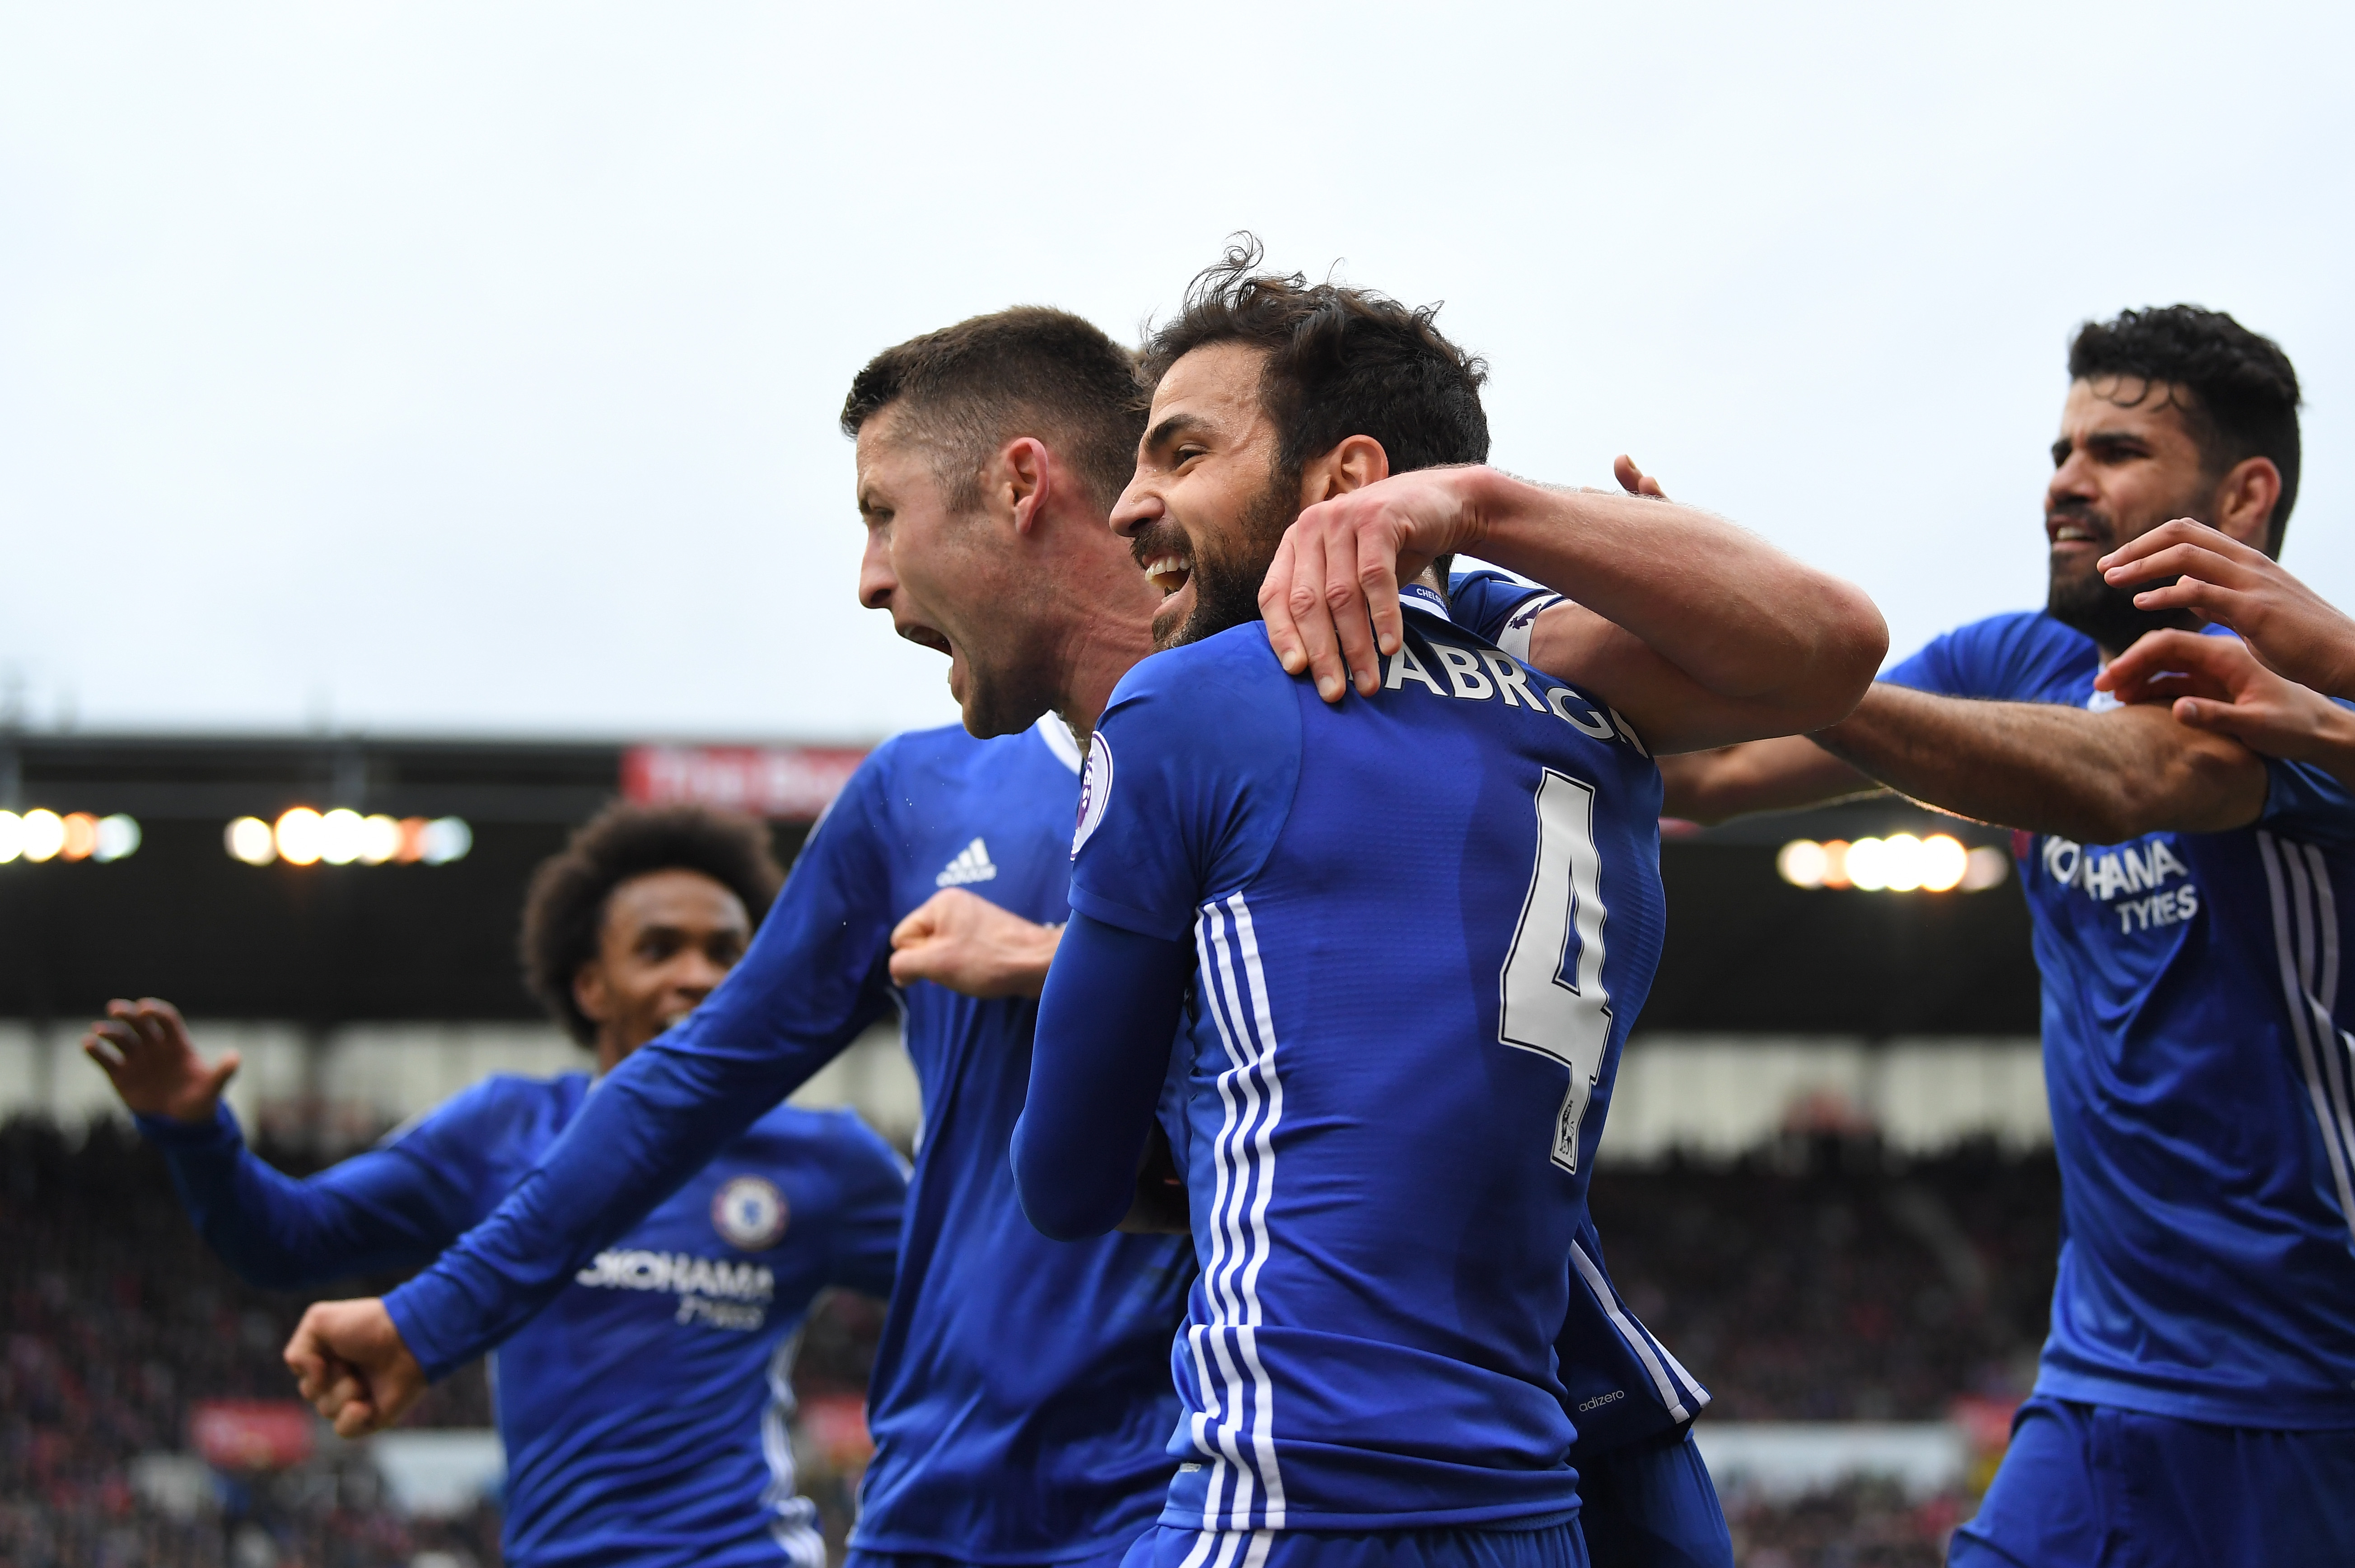 STOKE ON TRENT, ENGLAND - MARCH 18:  Gary Cahill of Chelsea celebrates scoring his sides second goal with his Chelsea team mates during the Premier League match between Stoke City and Chelsea at Bet365 Stadium on March 18, 2017 in Stoke on Trent, England.  (Photo by Laurence Griffiths/Getty Images)